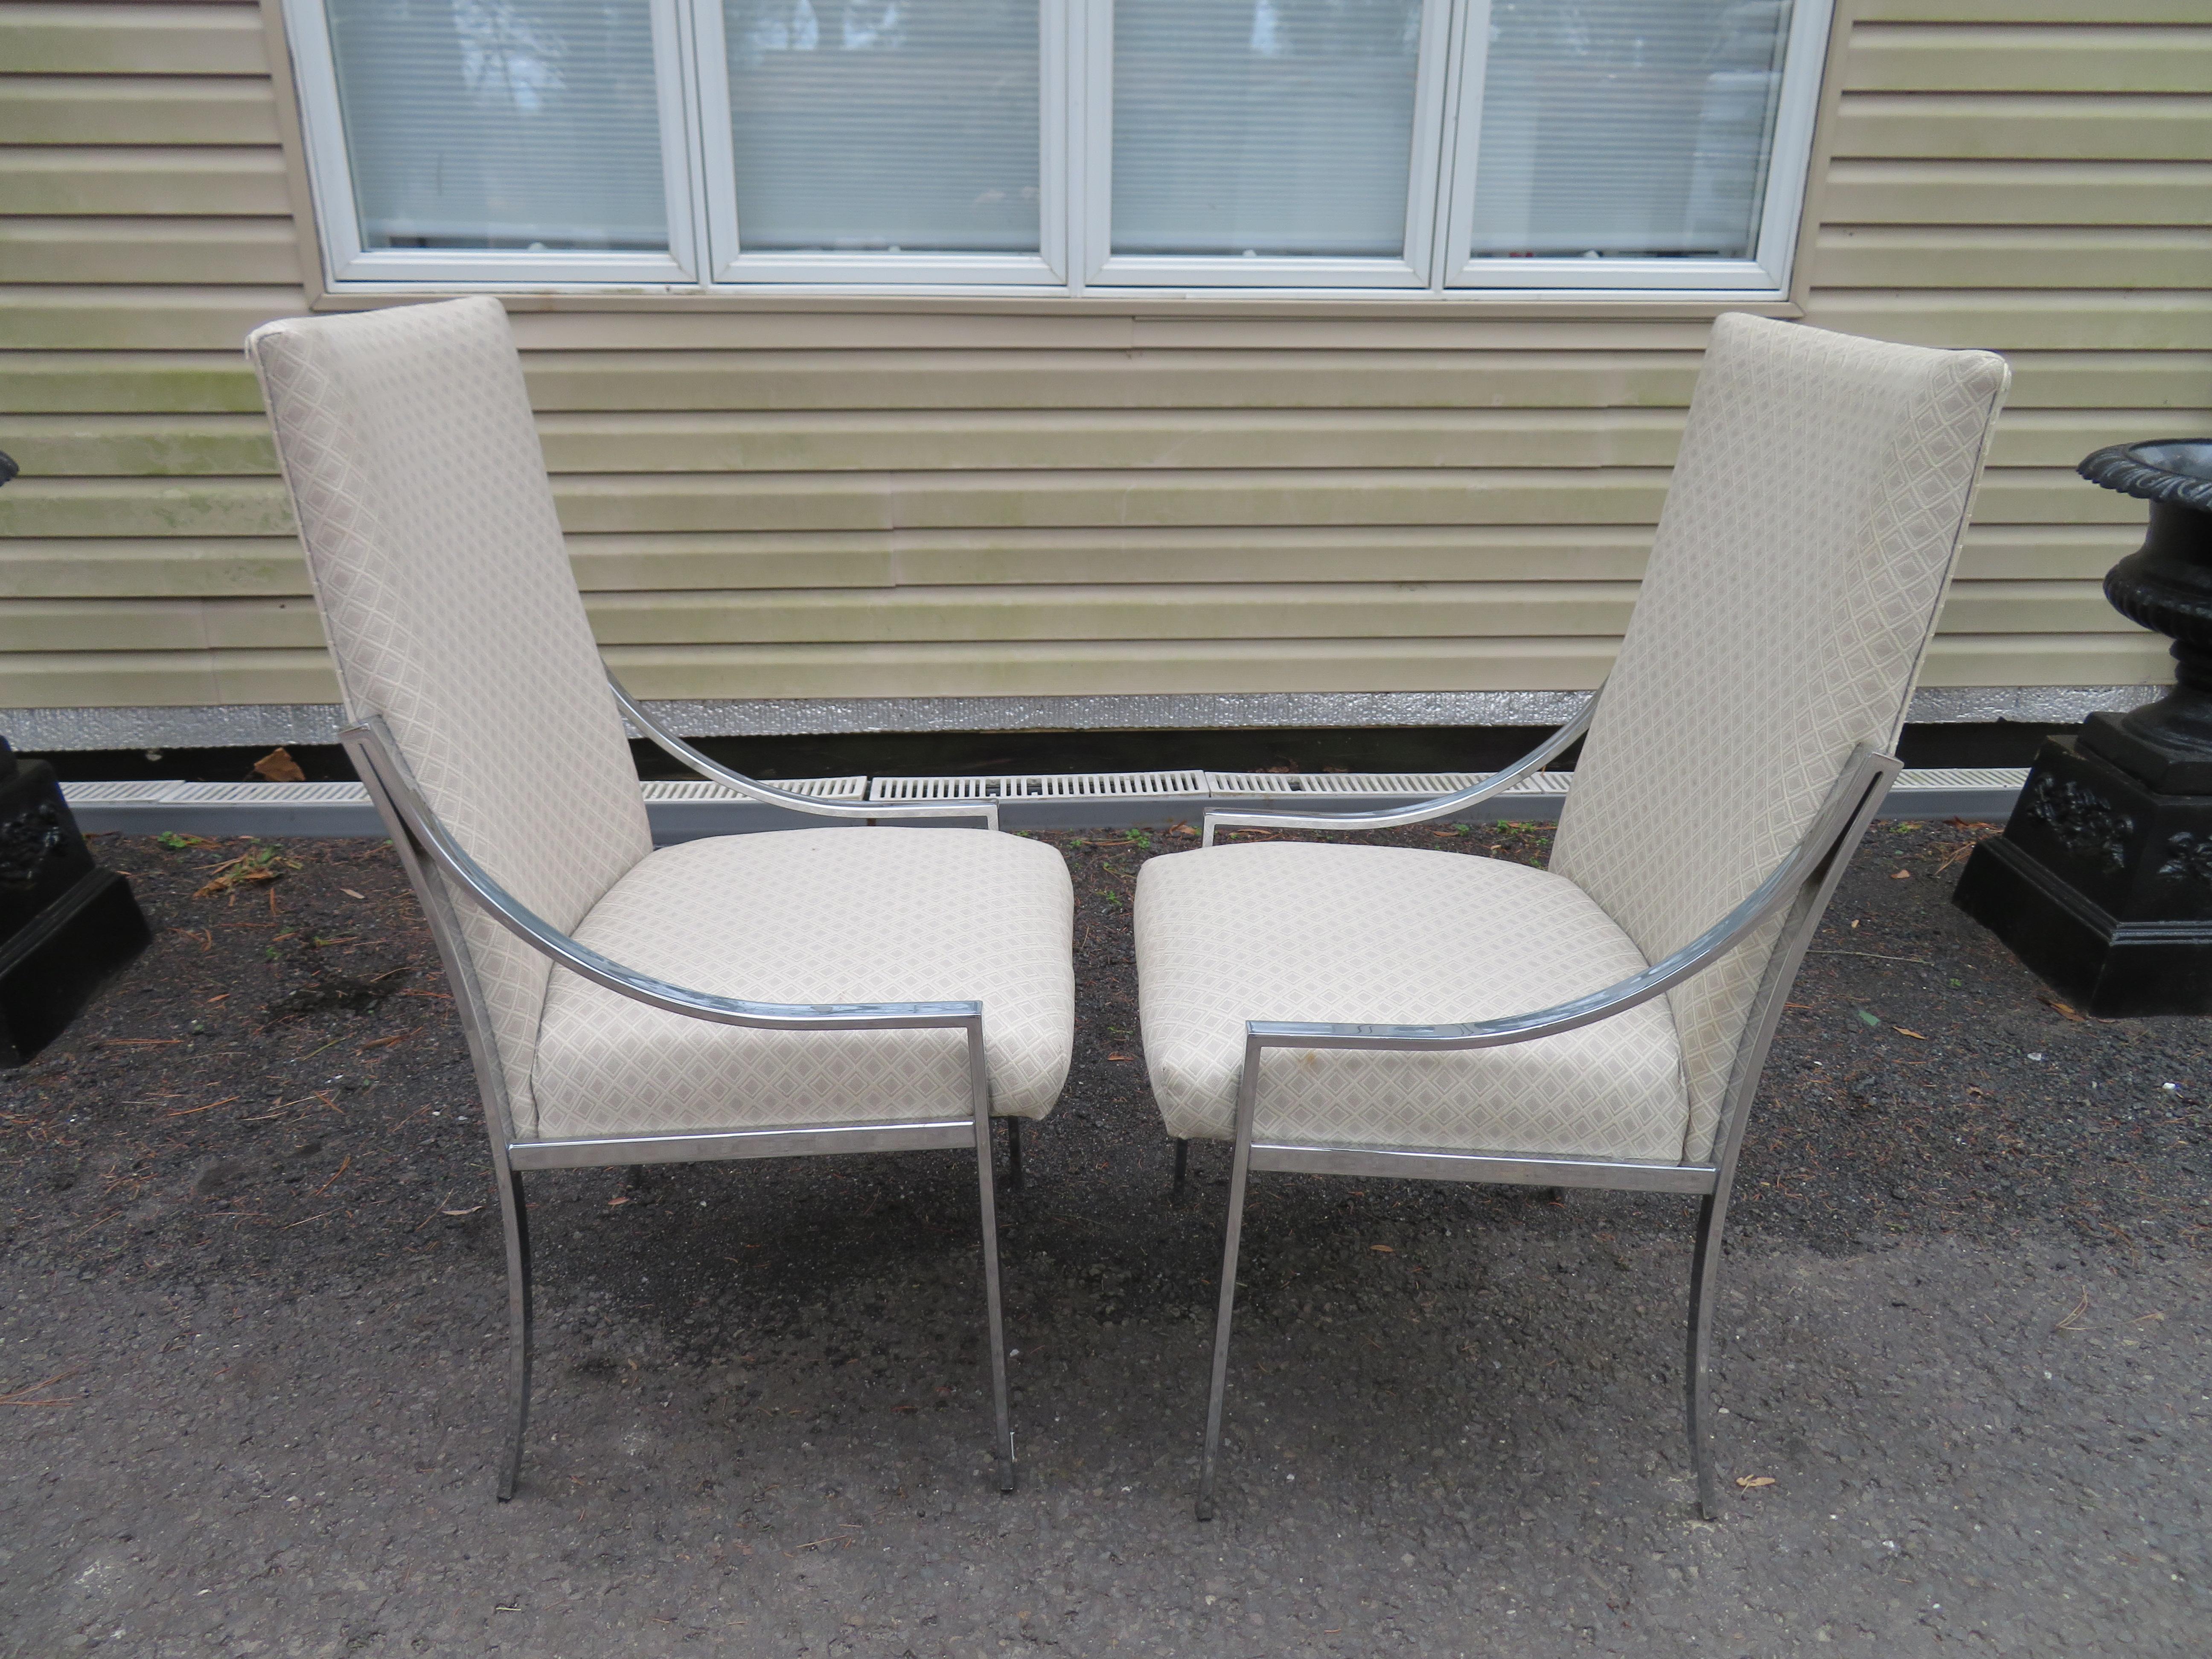 Stunning set of 8 Milo Baughman D.I.A. dining chairs. This set is in wonderful vintage condition with super shiny chrome frames and nice clean upholstery. The fabric looks like it was replaced in the 1990s and still looks nice-some minor spots. This